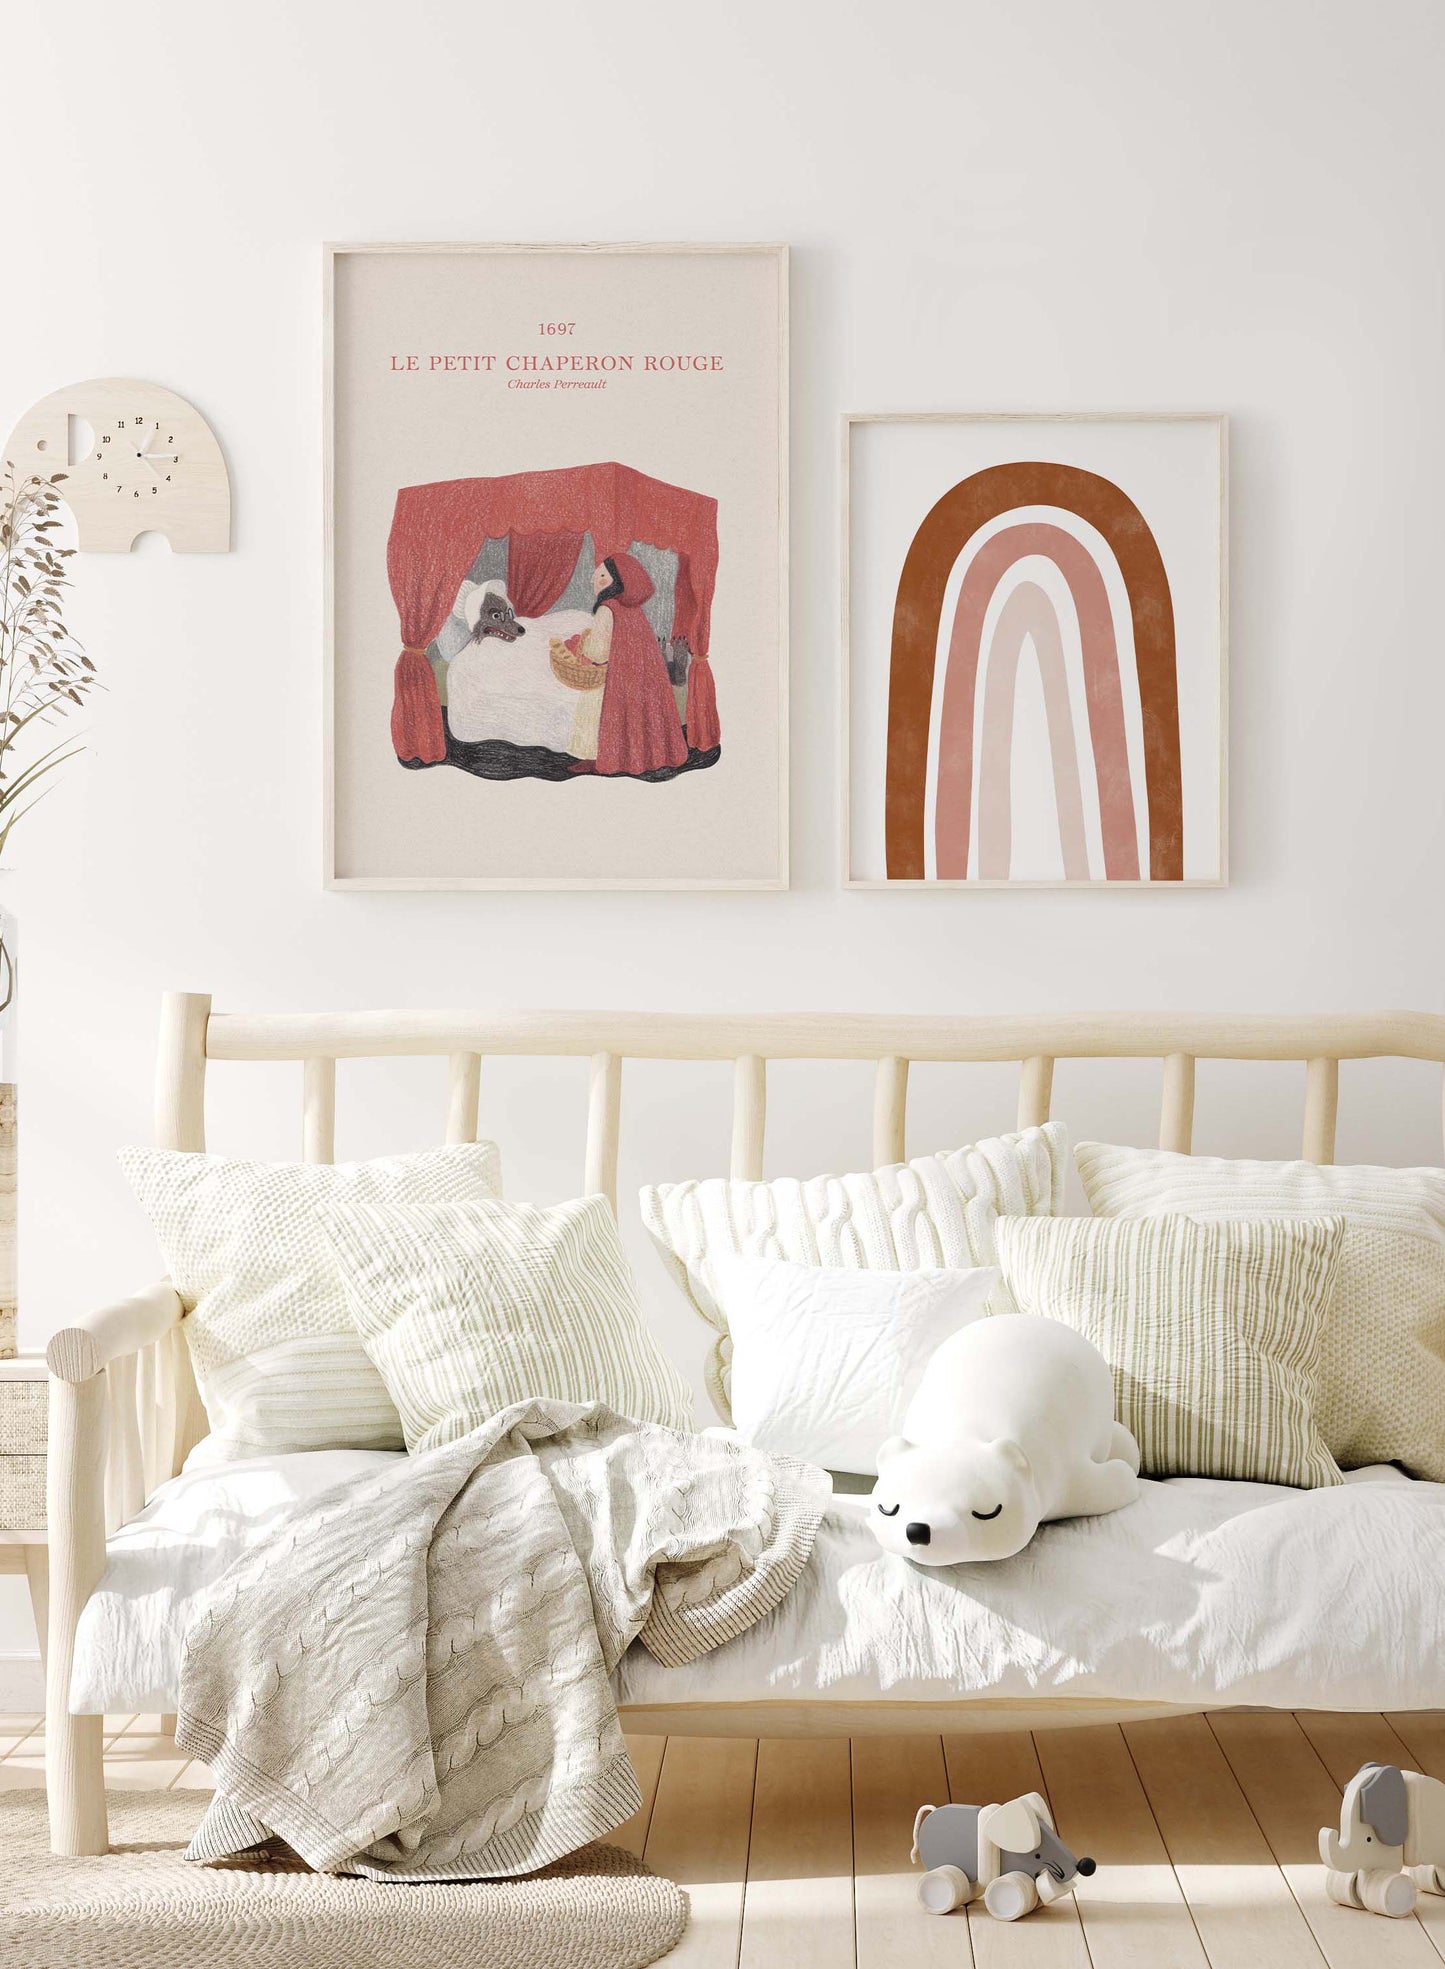 Little Red Riding Hood is a minimalist illustration by Opposite Wall of Charles Perrault's Little Red Riding Hood where the little girl is face-to-face with the wolf.